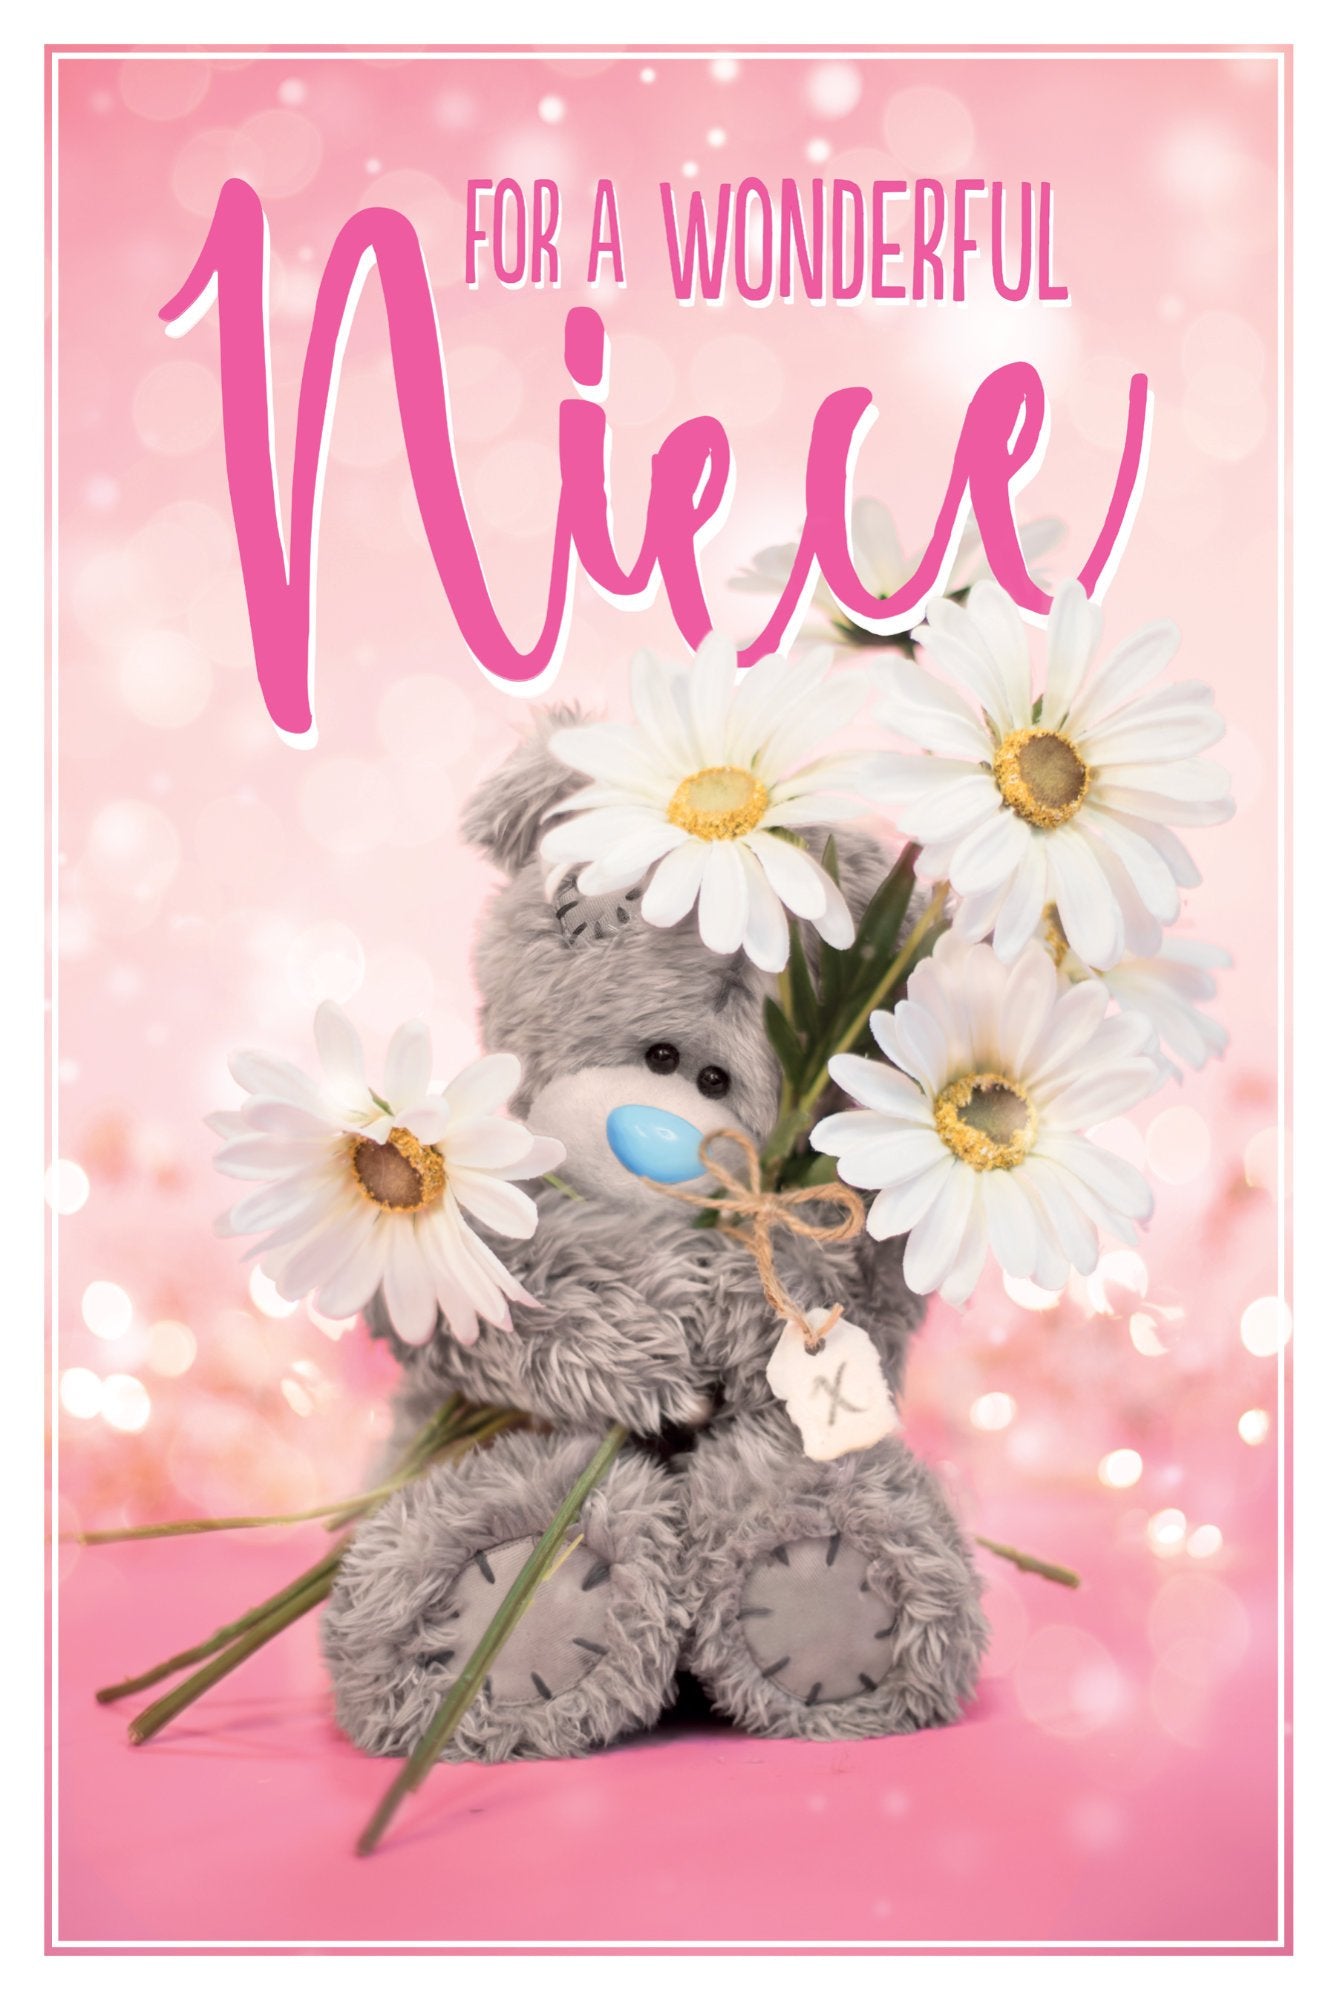 Photograph of Niece Birthday Teddy Flowers Greetings Card at Nicole's Shop